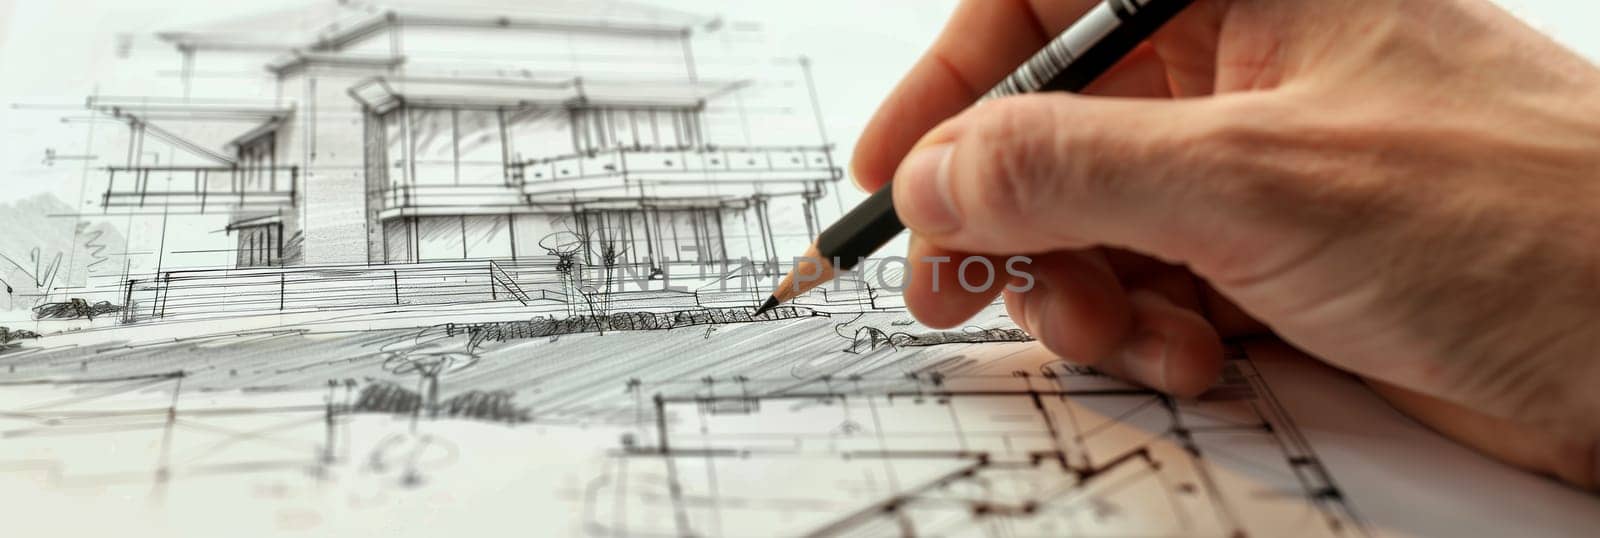 A person meticulously sketches a house with a pencil, pouring creativity and imagination into their dream home design.